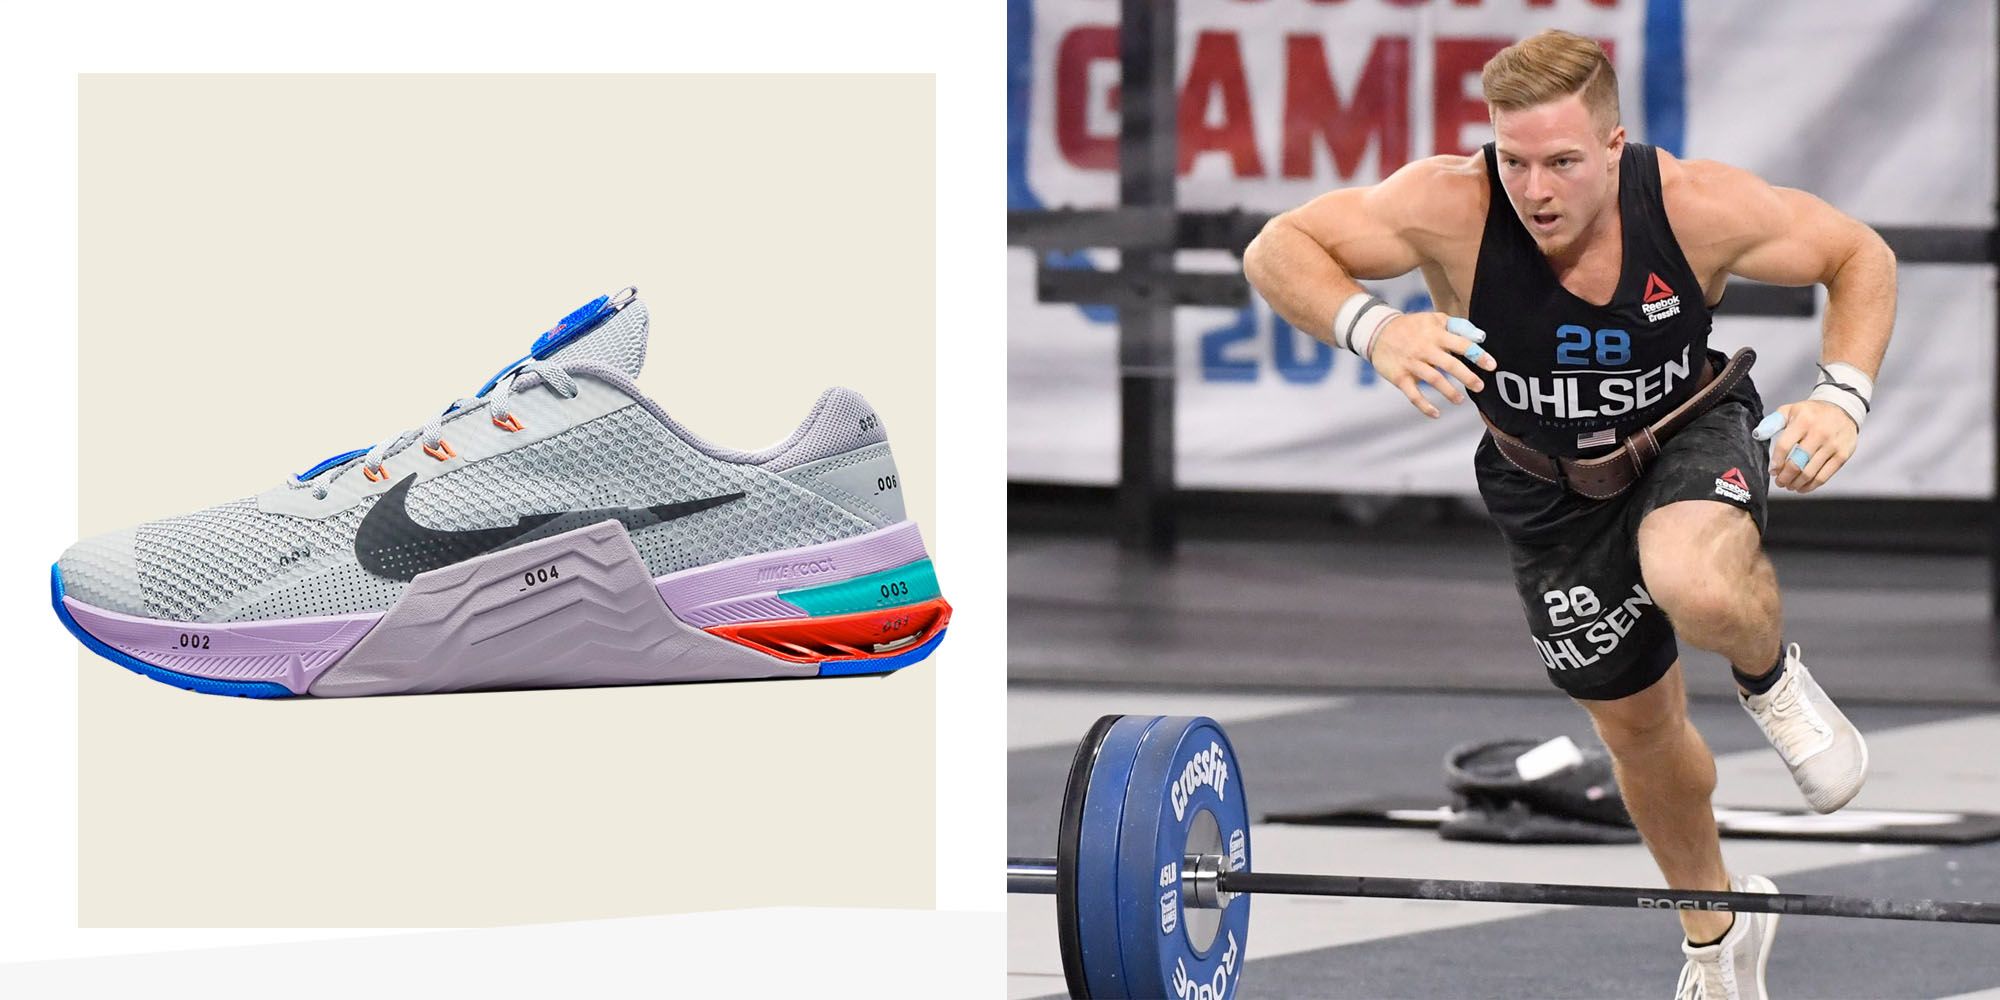 on running shoes for crossfit